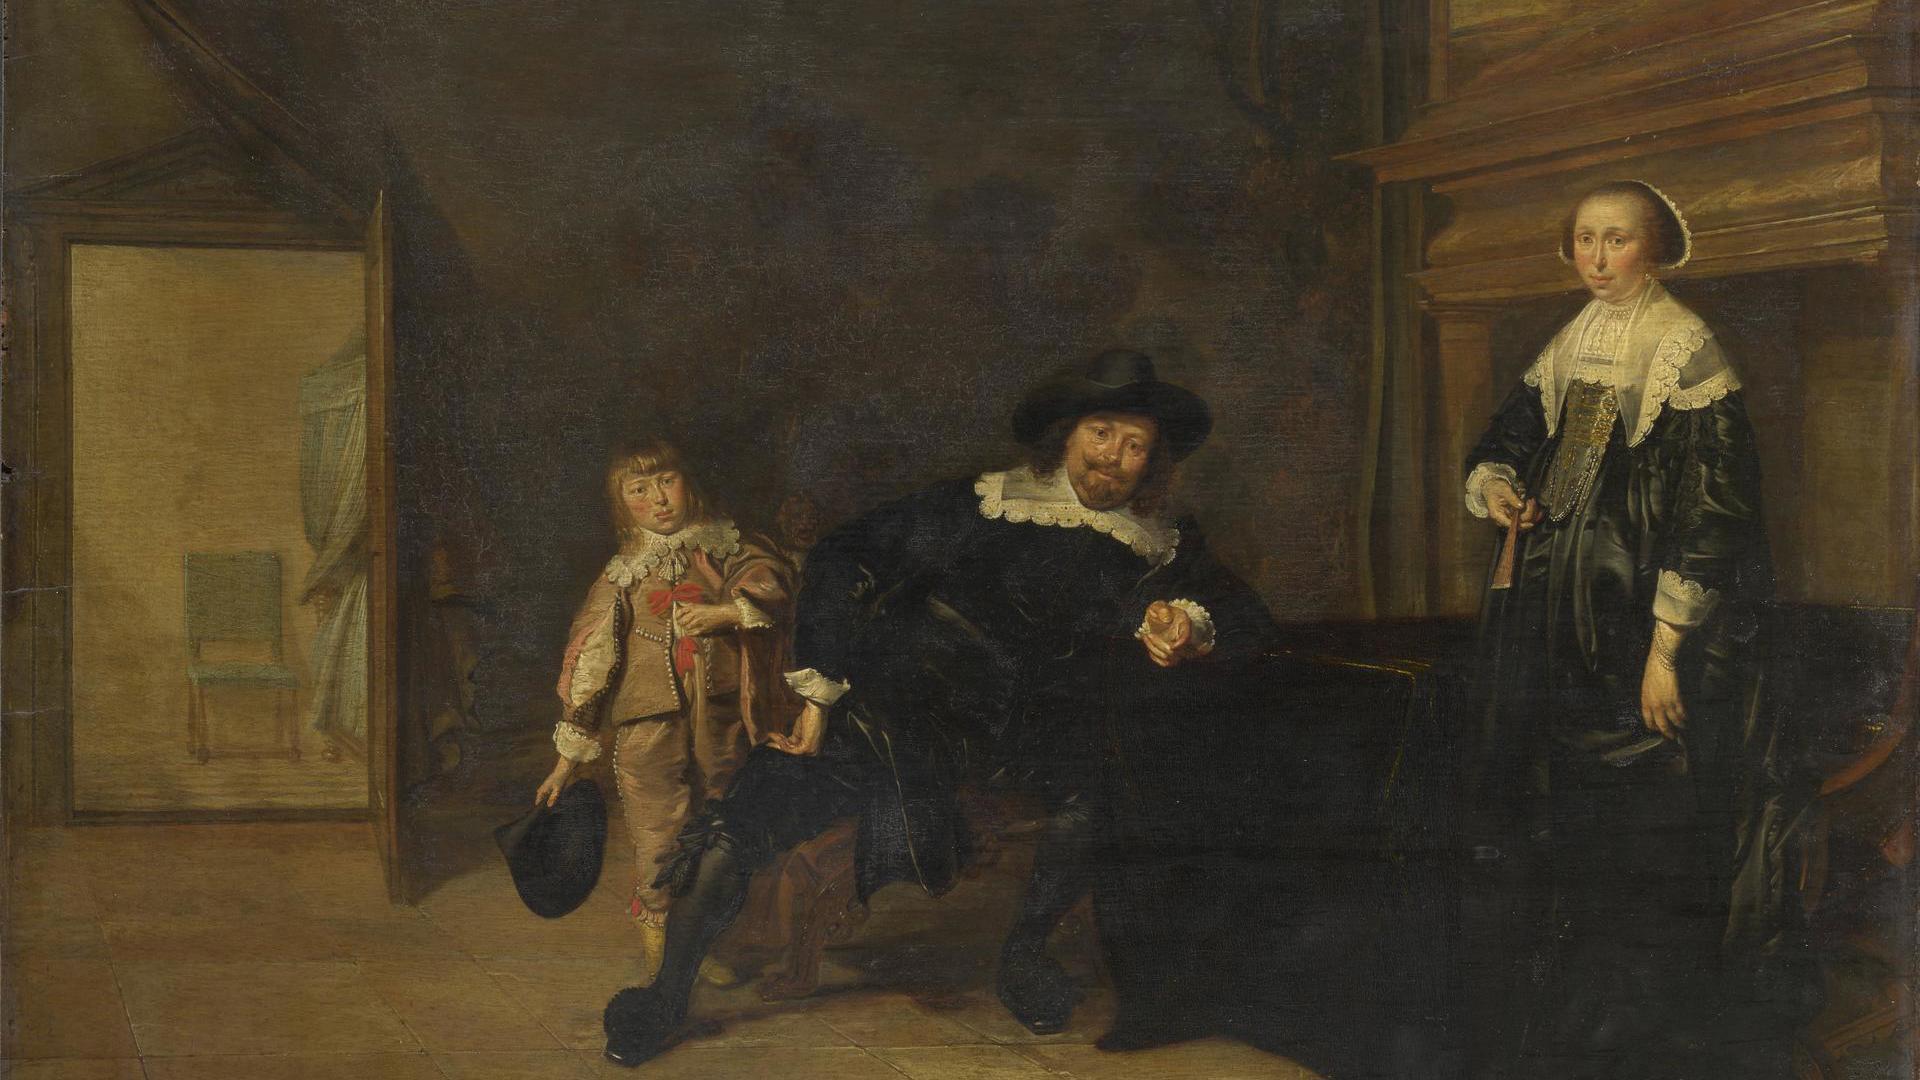 Portrait of a Man, a Woman and a Boy in a Room by Pieter Codde